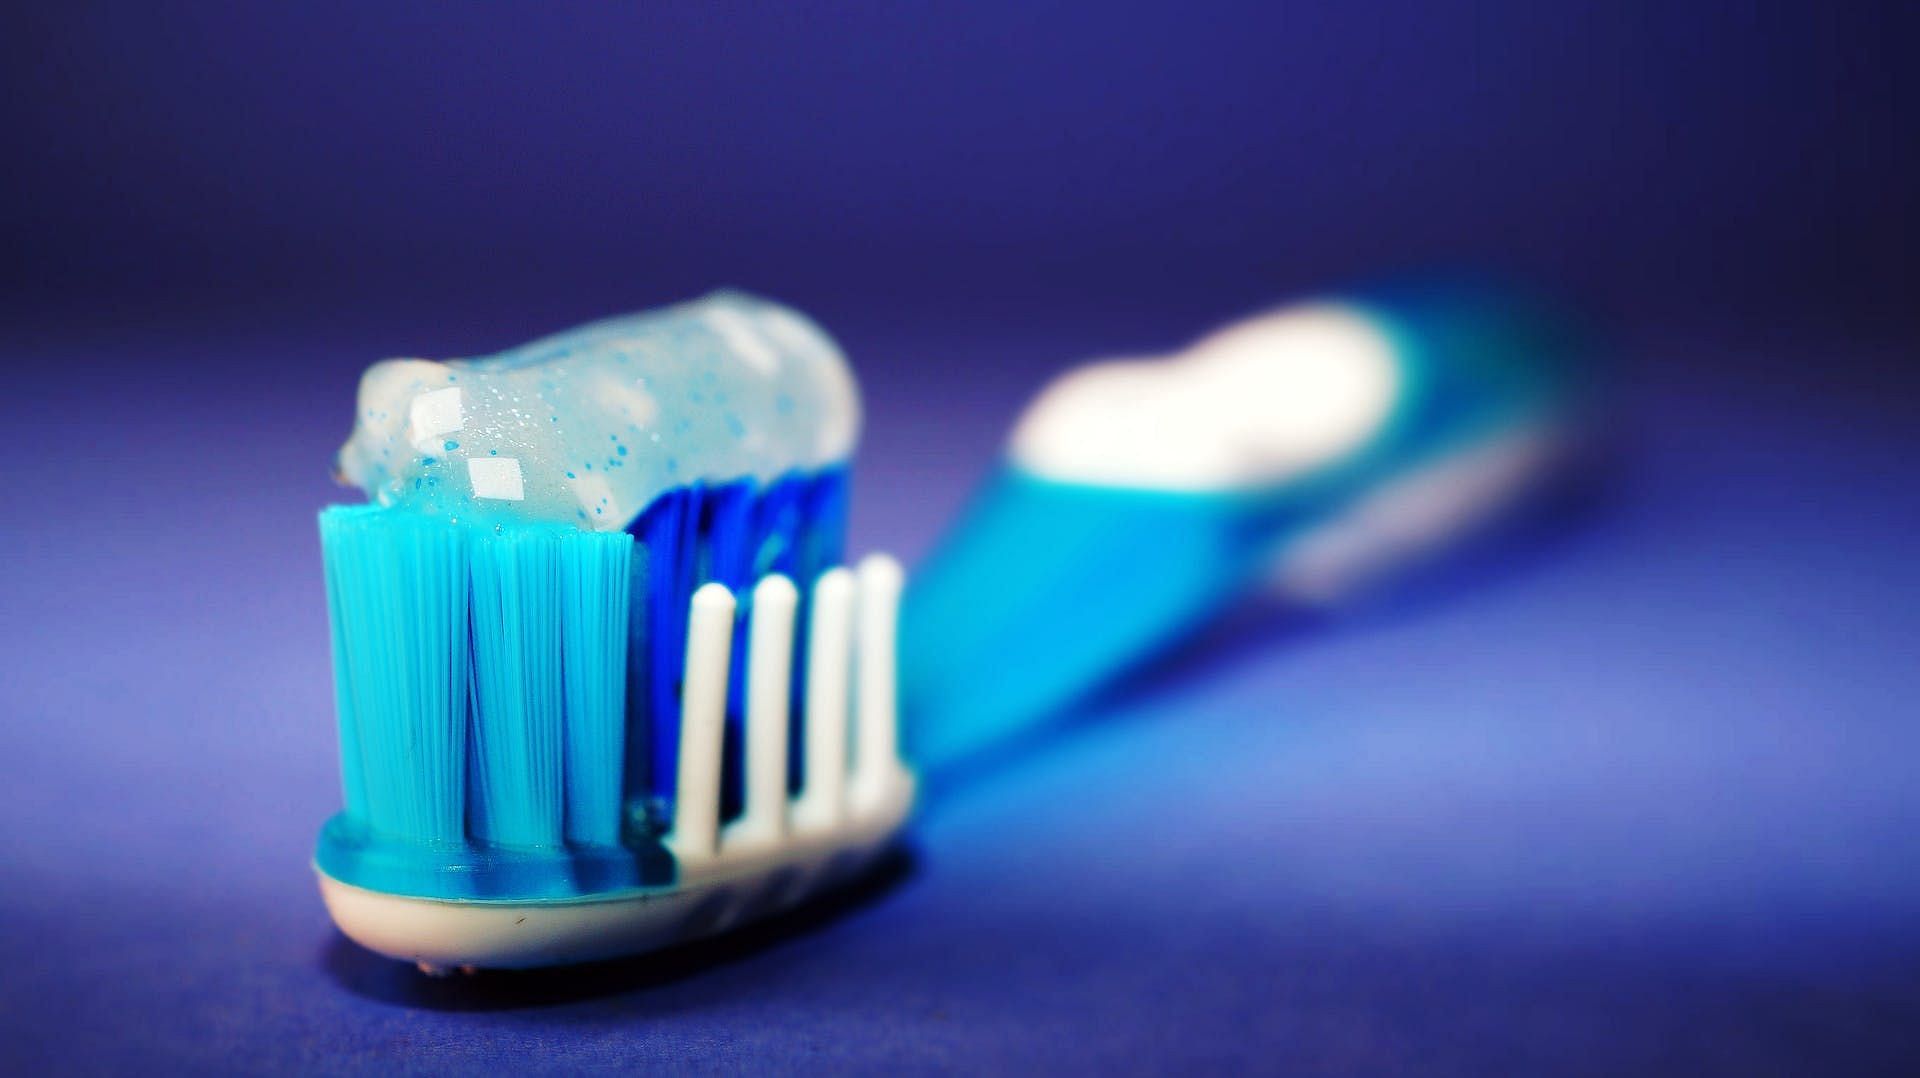 Always use a fluoride-based toothpaste. (Image via Pexels/George Becker)